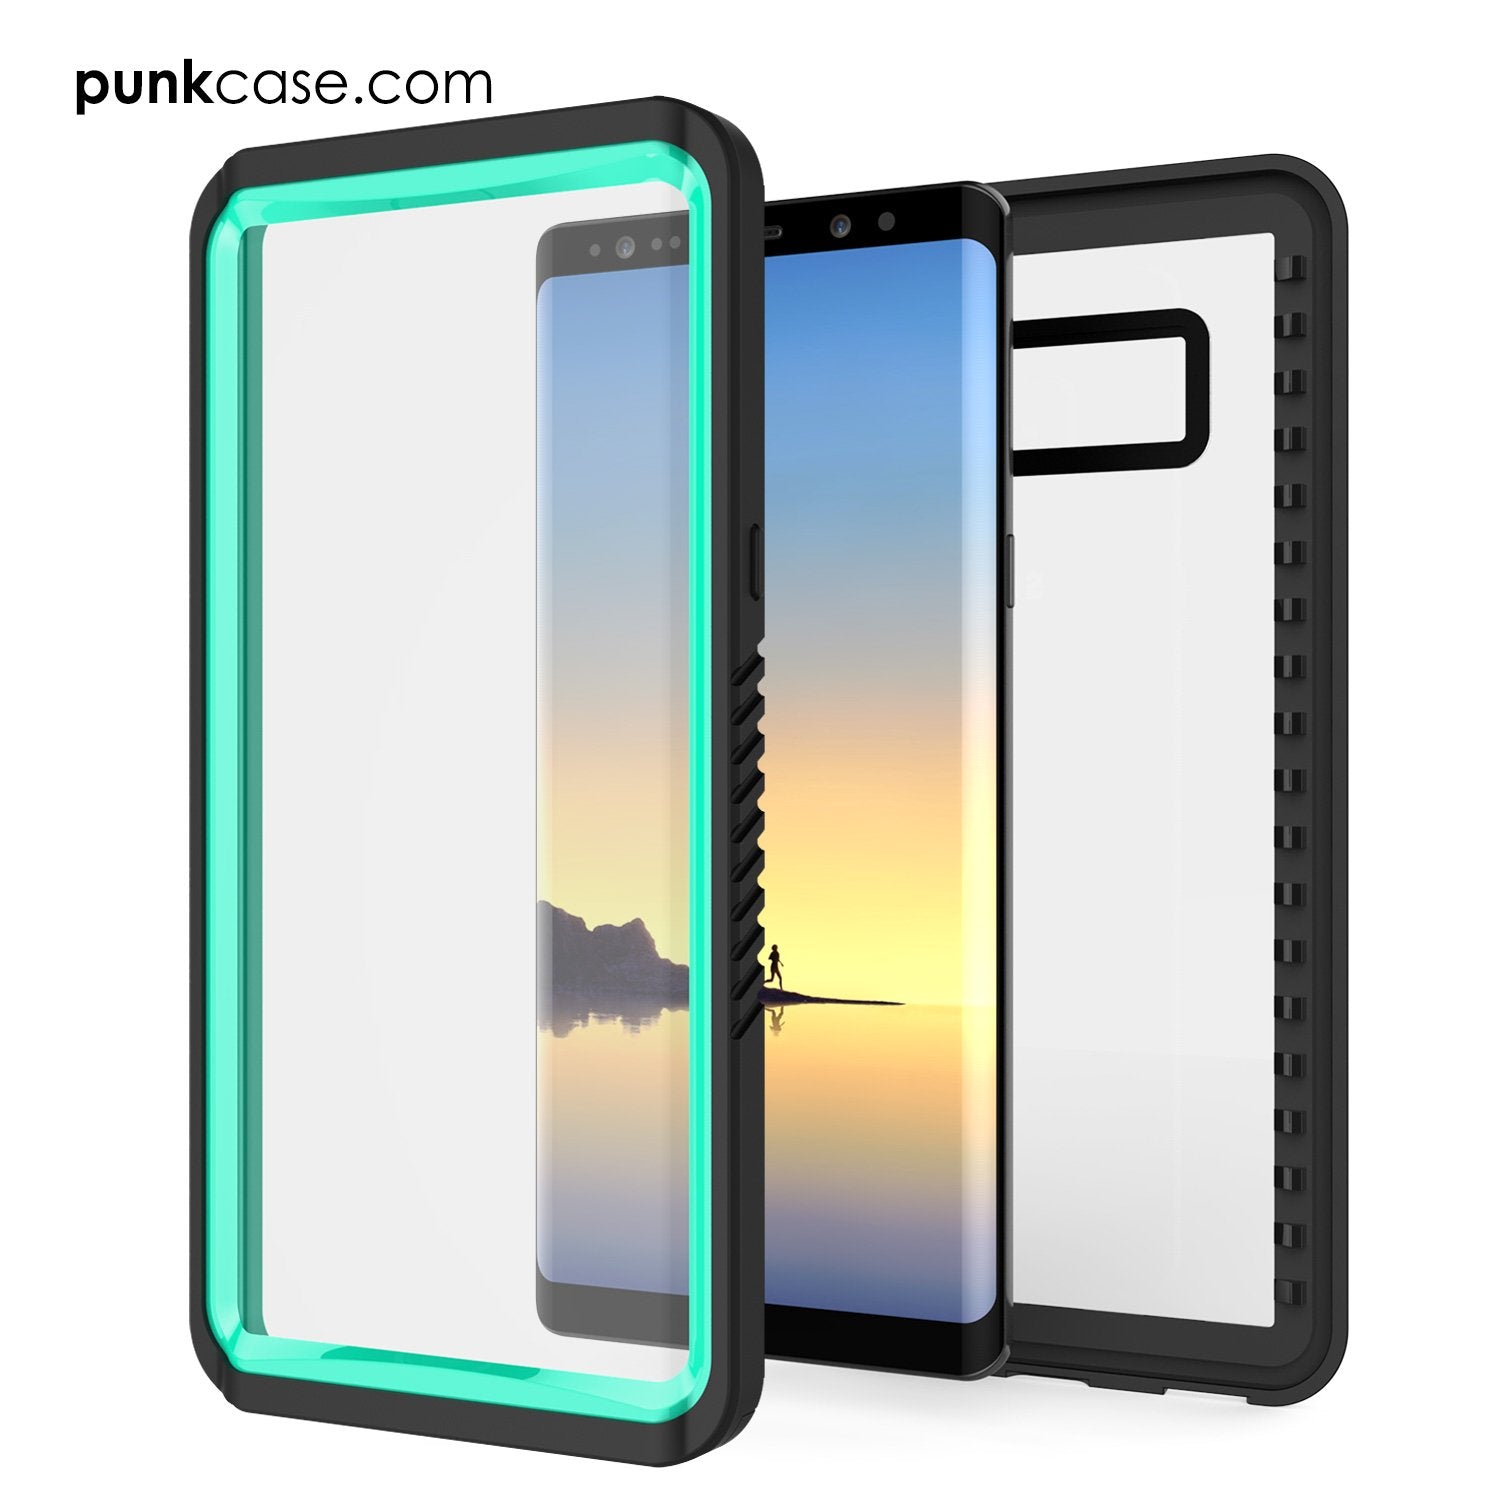 Galaxy Note 8 Case, Punkcase [Extreme Series] [Slim Fit] [IP68 Certified] [Shockproof] Armor Cover W/ Built In Screen Protector [Teal]